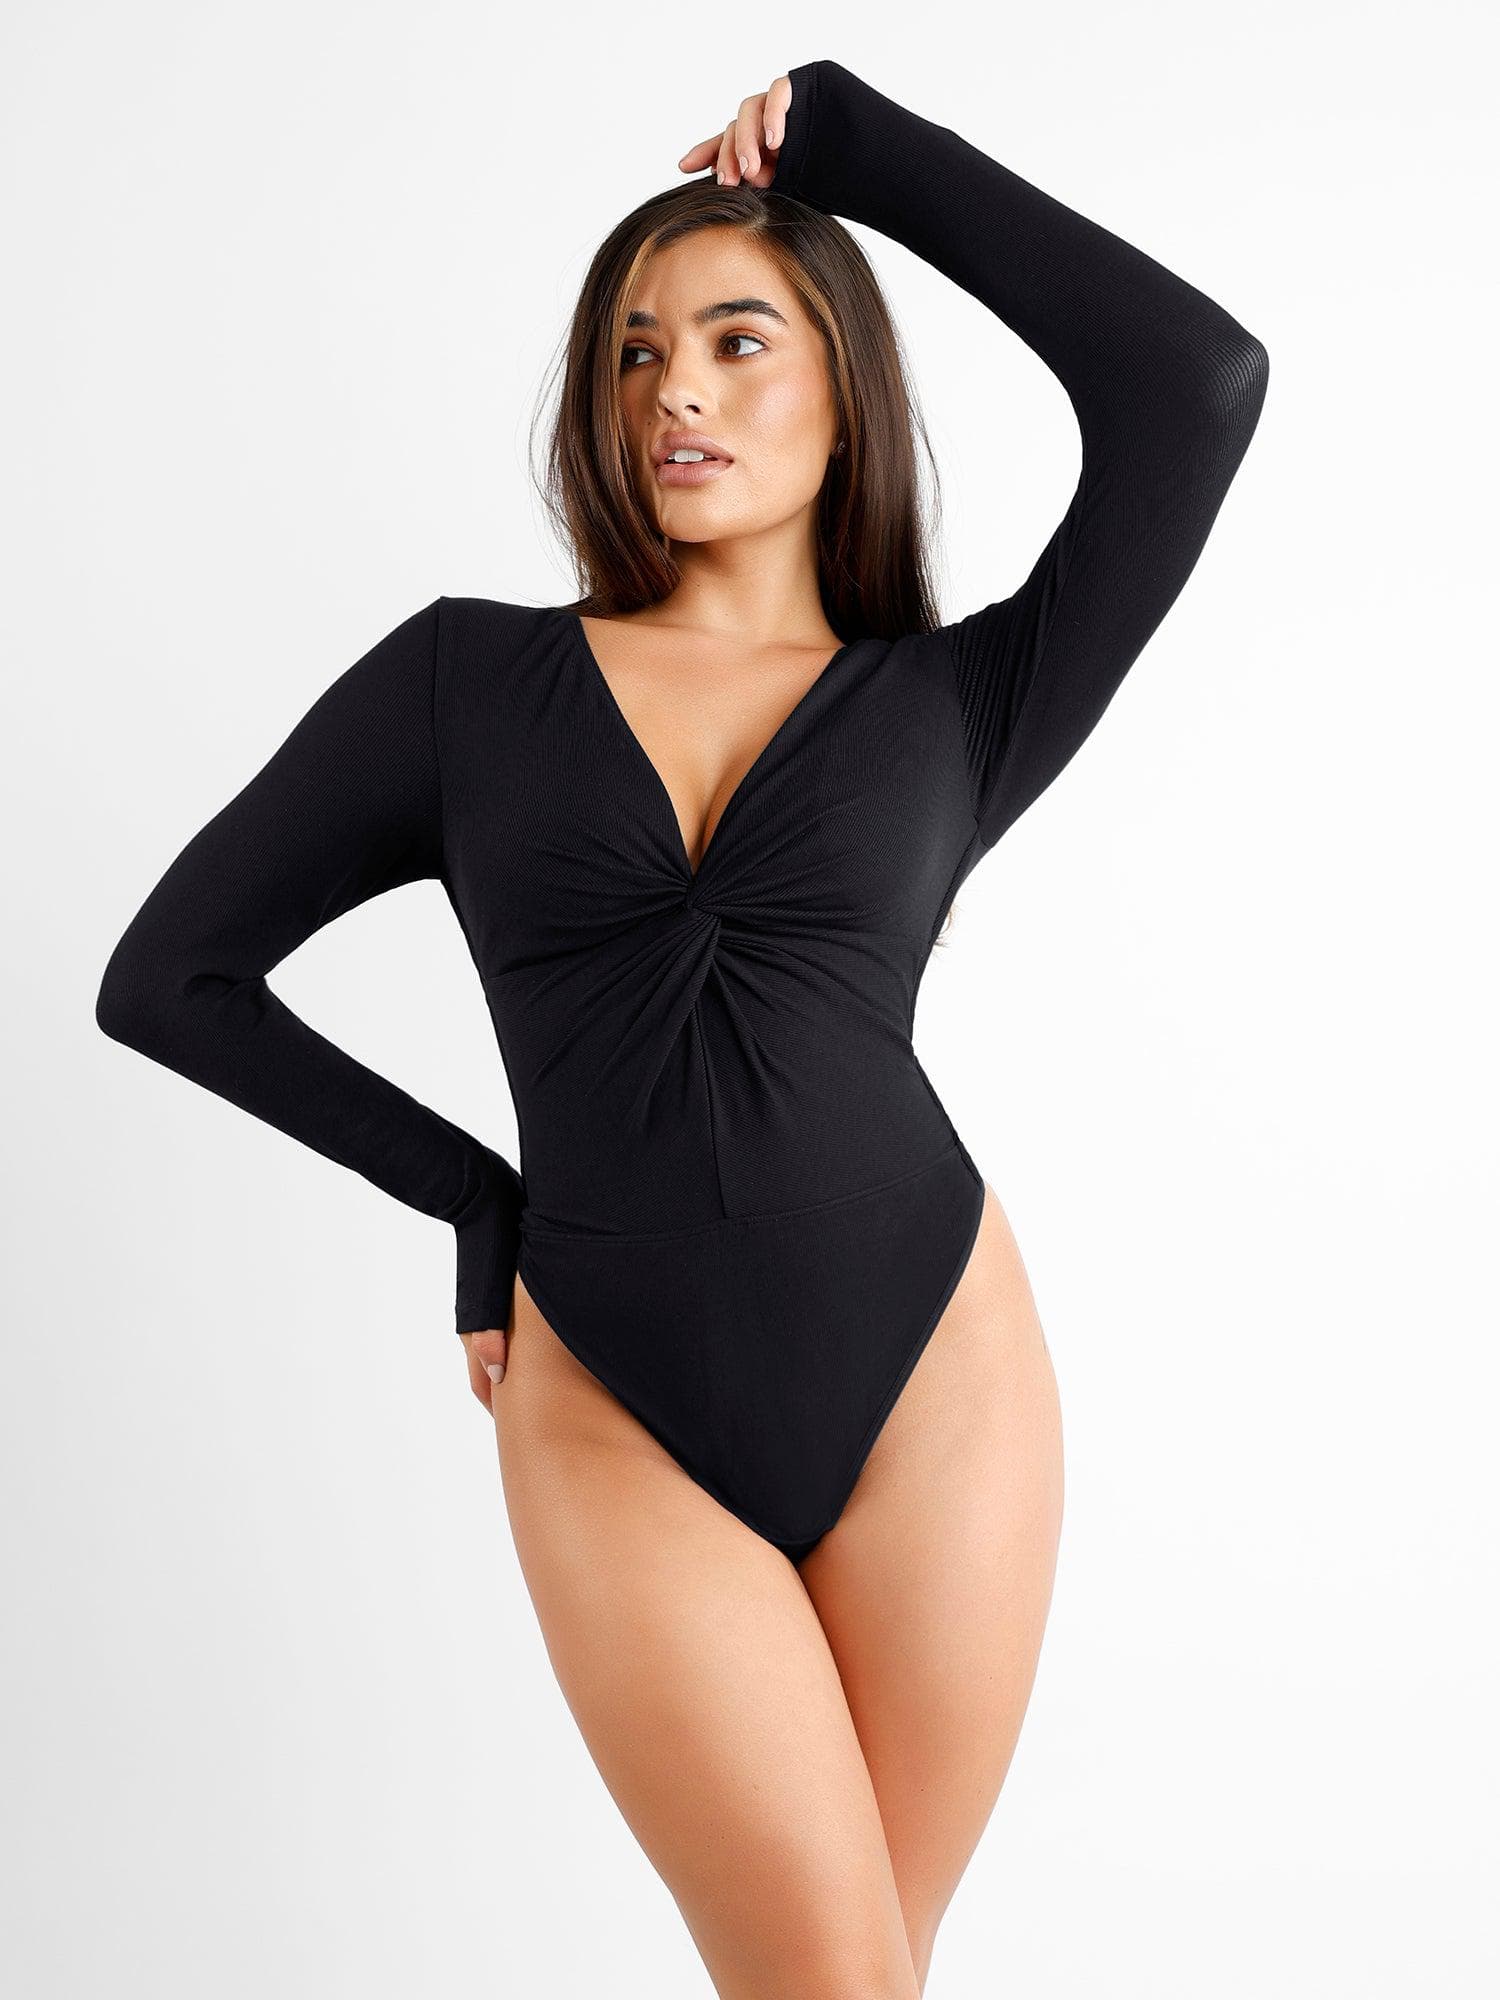 Thong Bodysuit for Women, Sexy Cut Out V Neck Long Sleeve Slimming